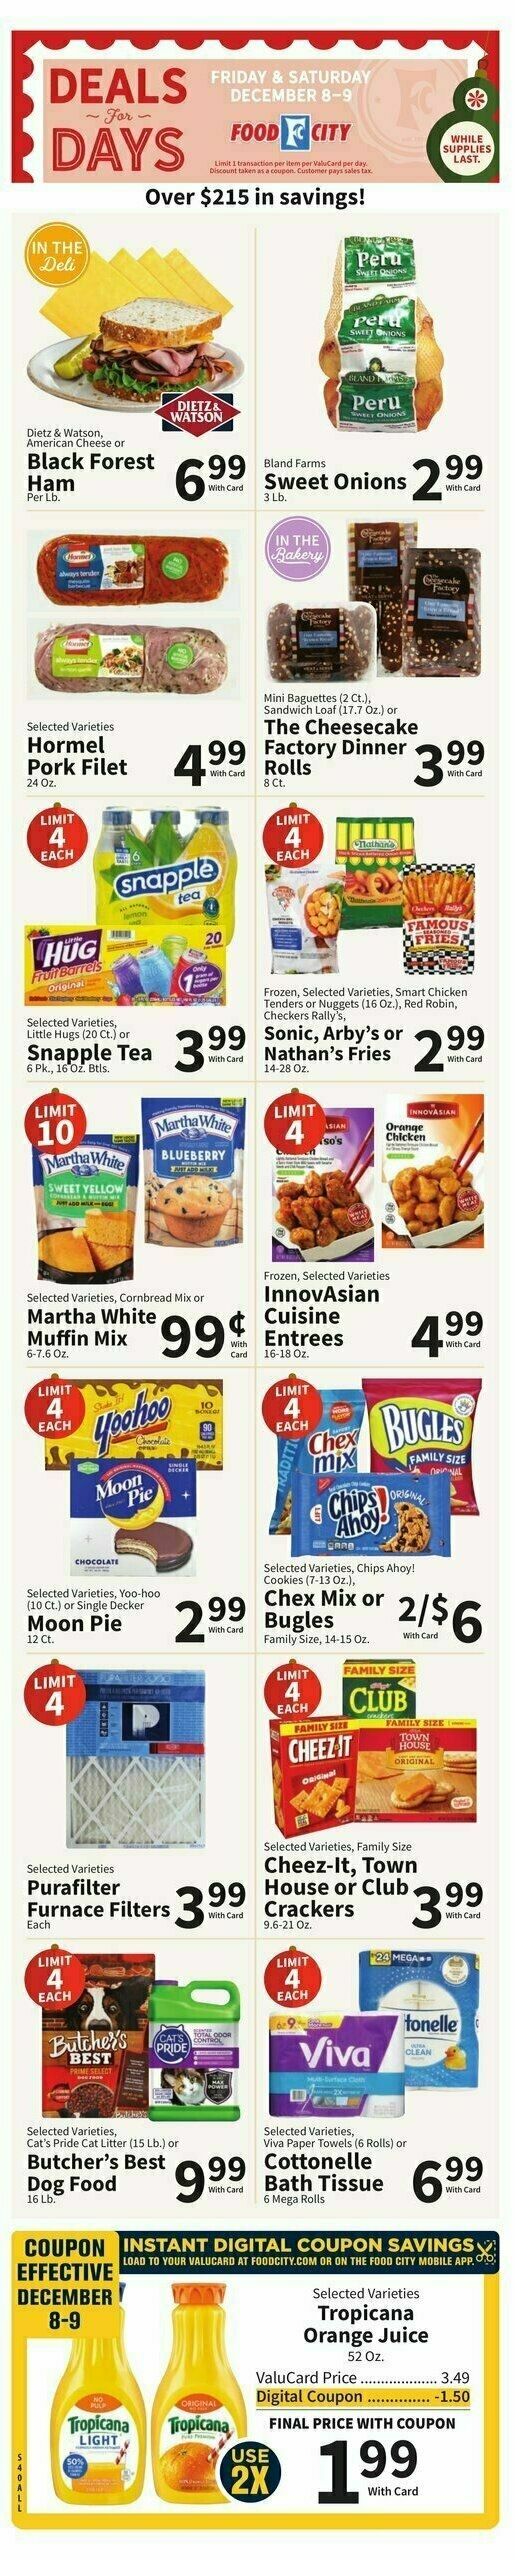 Food City Weekly Ad from December 6